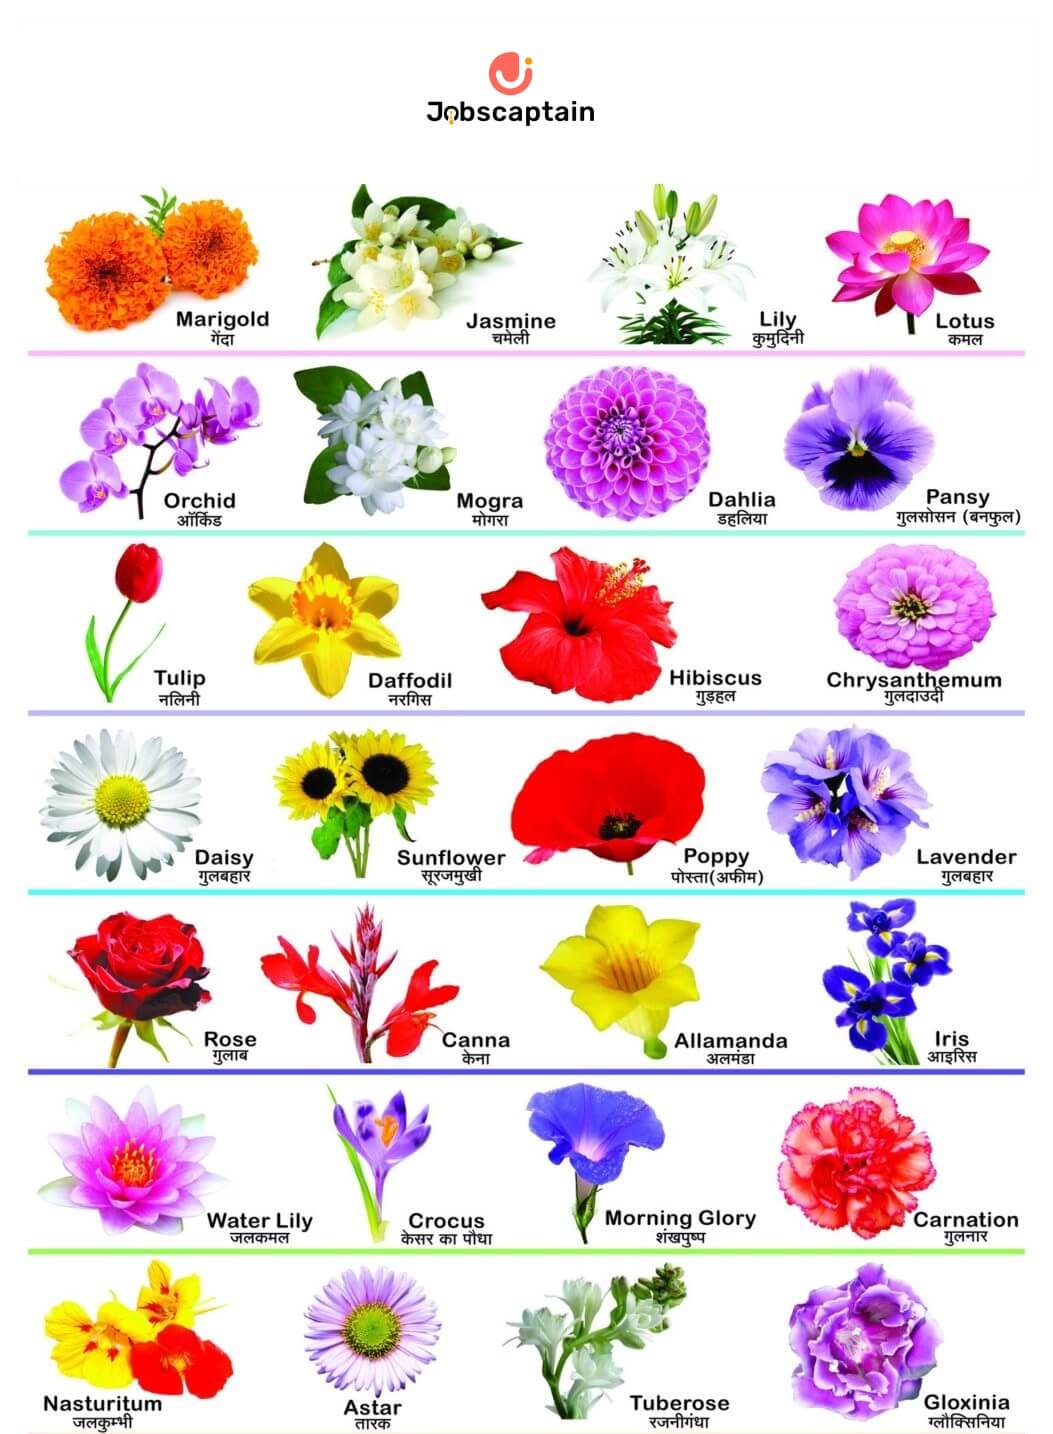 100+] Flowers Name in Hindi and English PDF - JobsCaptain